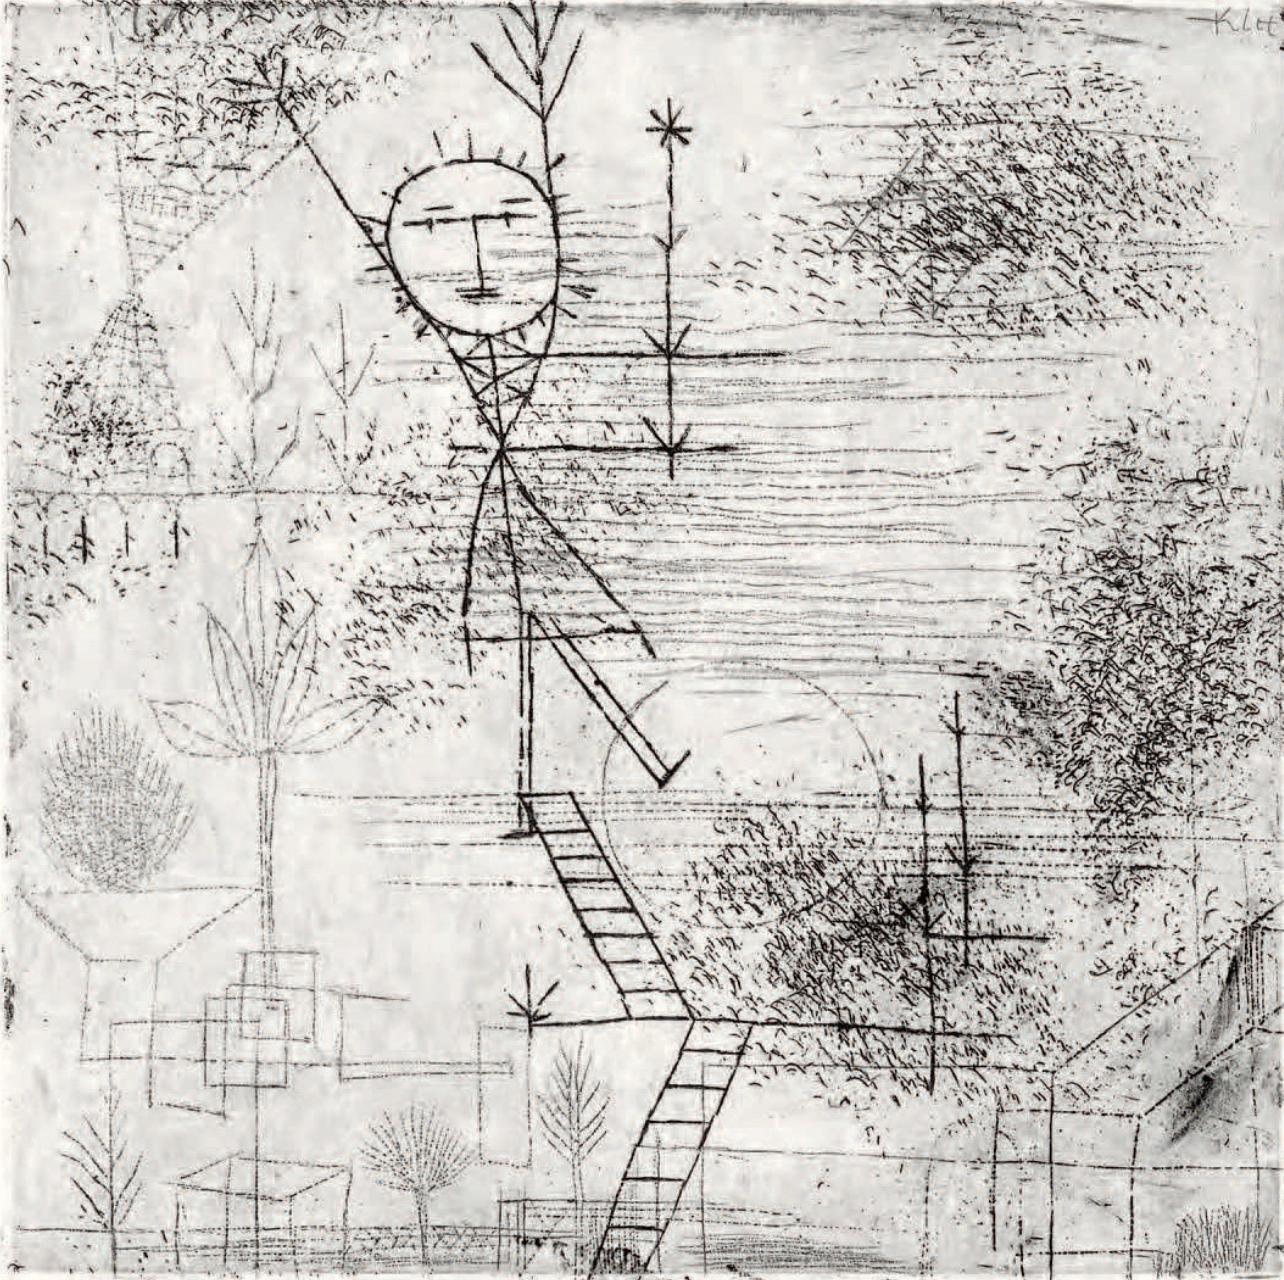 Etching on vélin paper. Inscription: Unsigned and unnumbered. Good condition. Notes: From the folio, Prints of Paul Klee, 1945. Published by the Museum of Modern Art, New York and Curt Valentin, New York; printed by Meriden Gravure Company, Meriden,